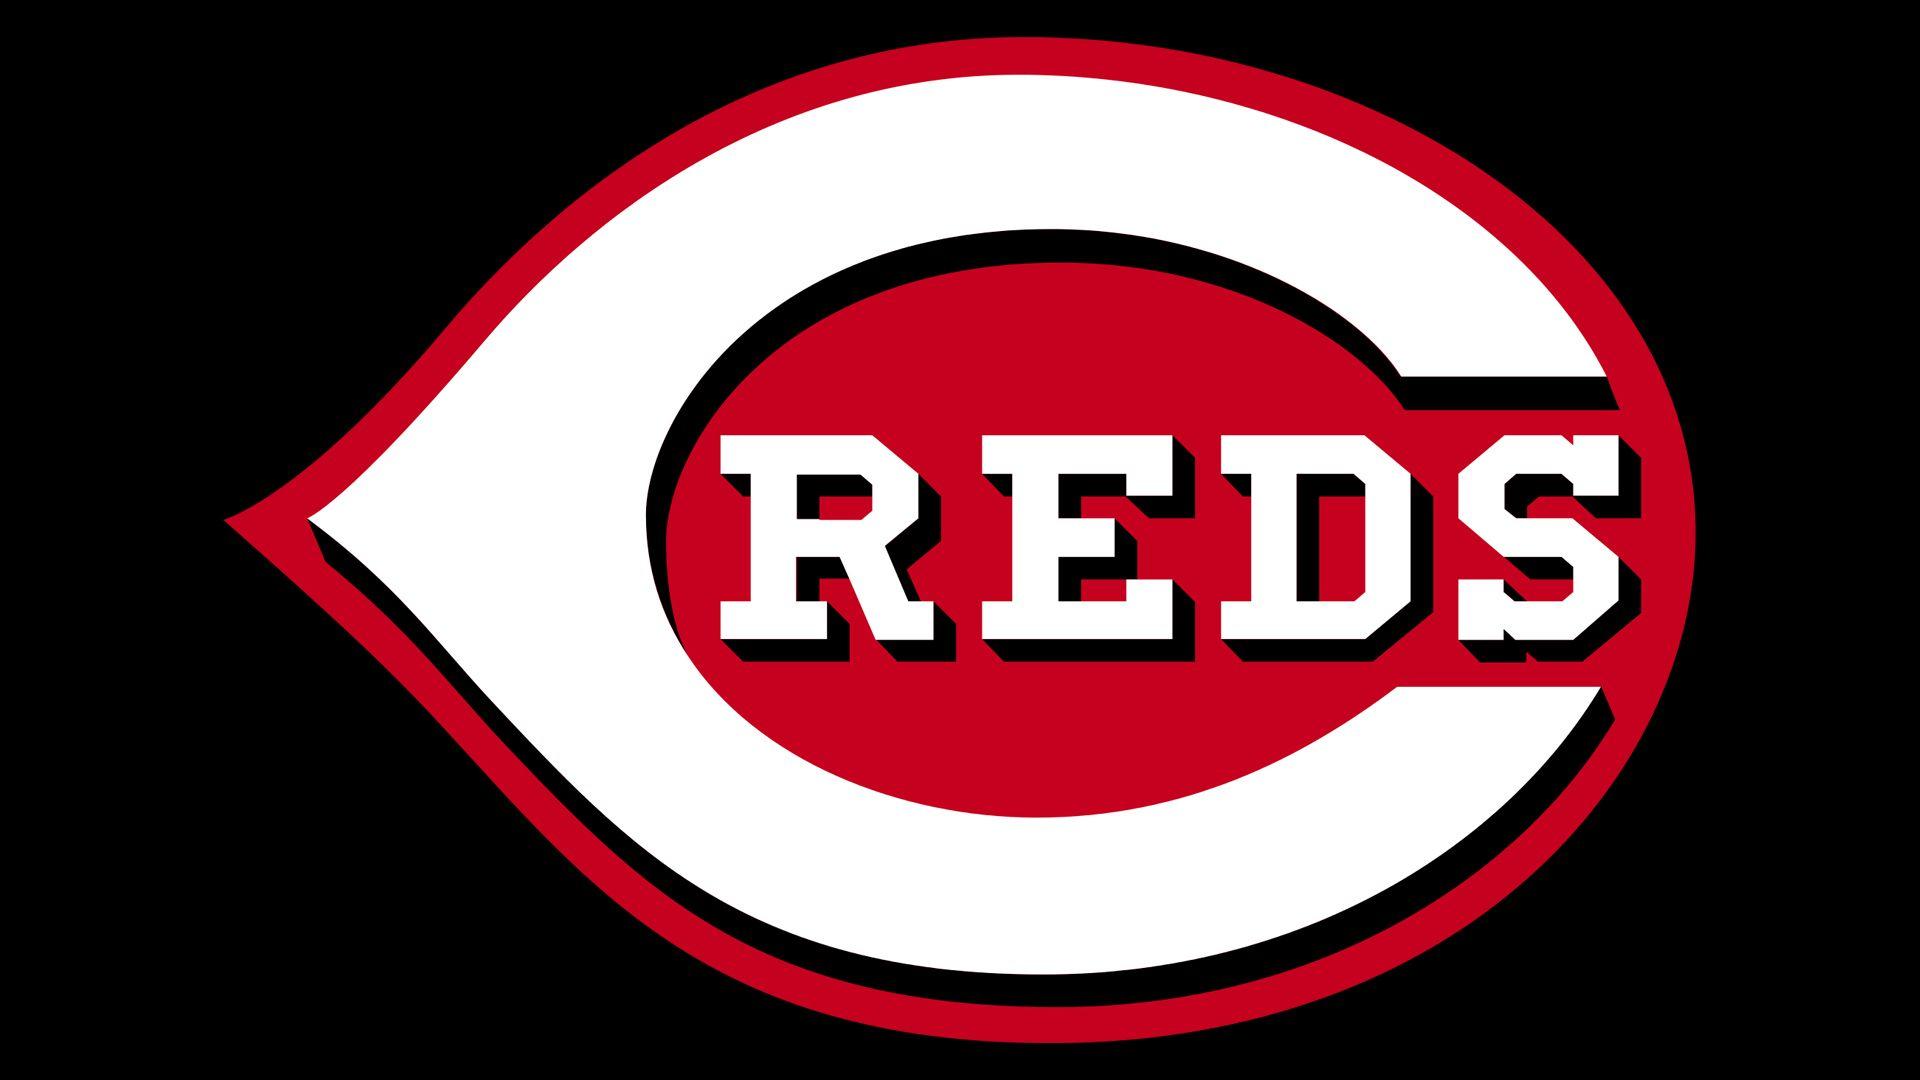 Cincinnati Reds Logo - Cincinnati Reds Logo, Cincinnati Reds Symbol, Meaning, History and ...